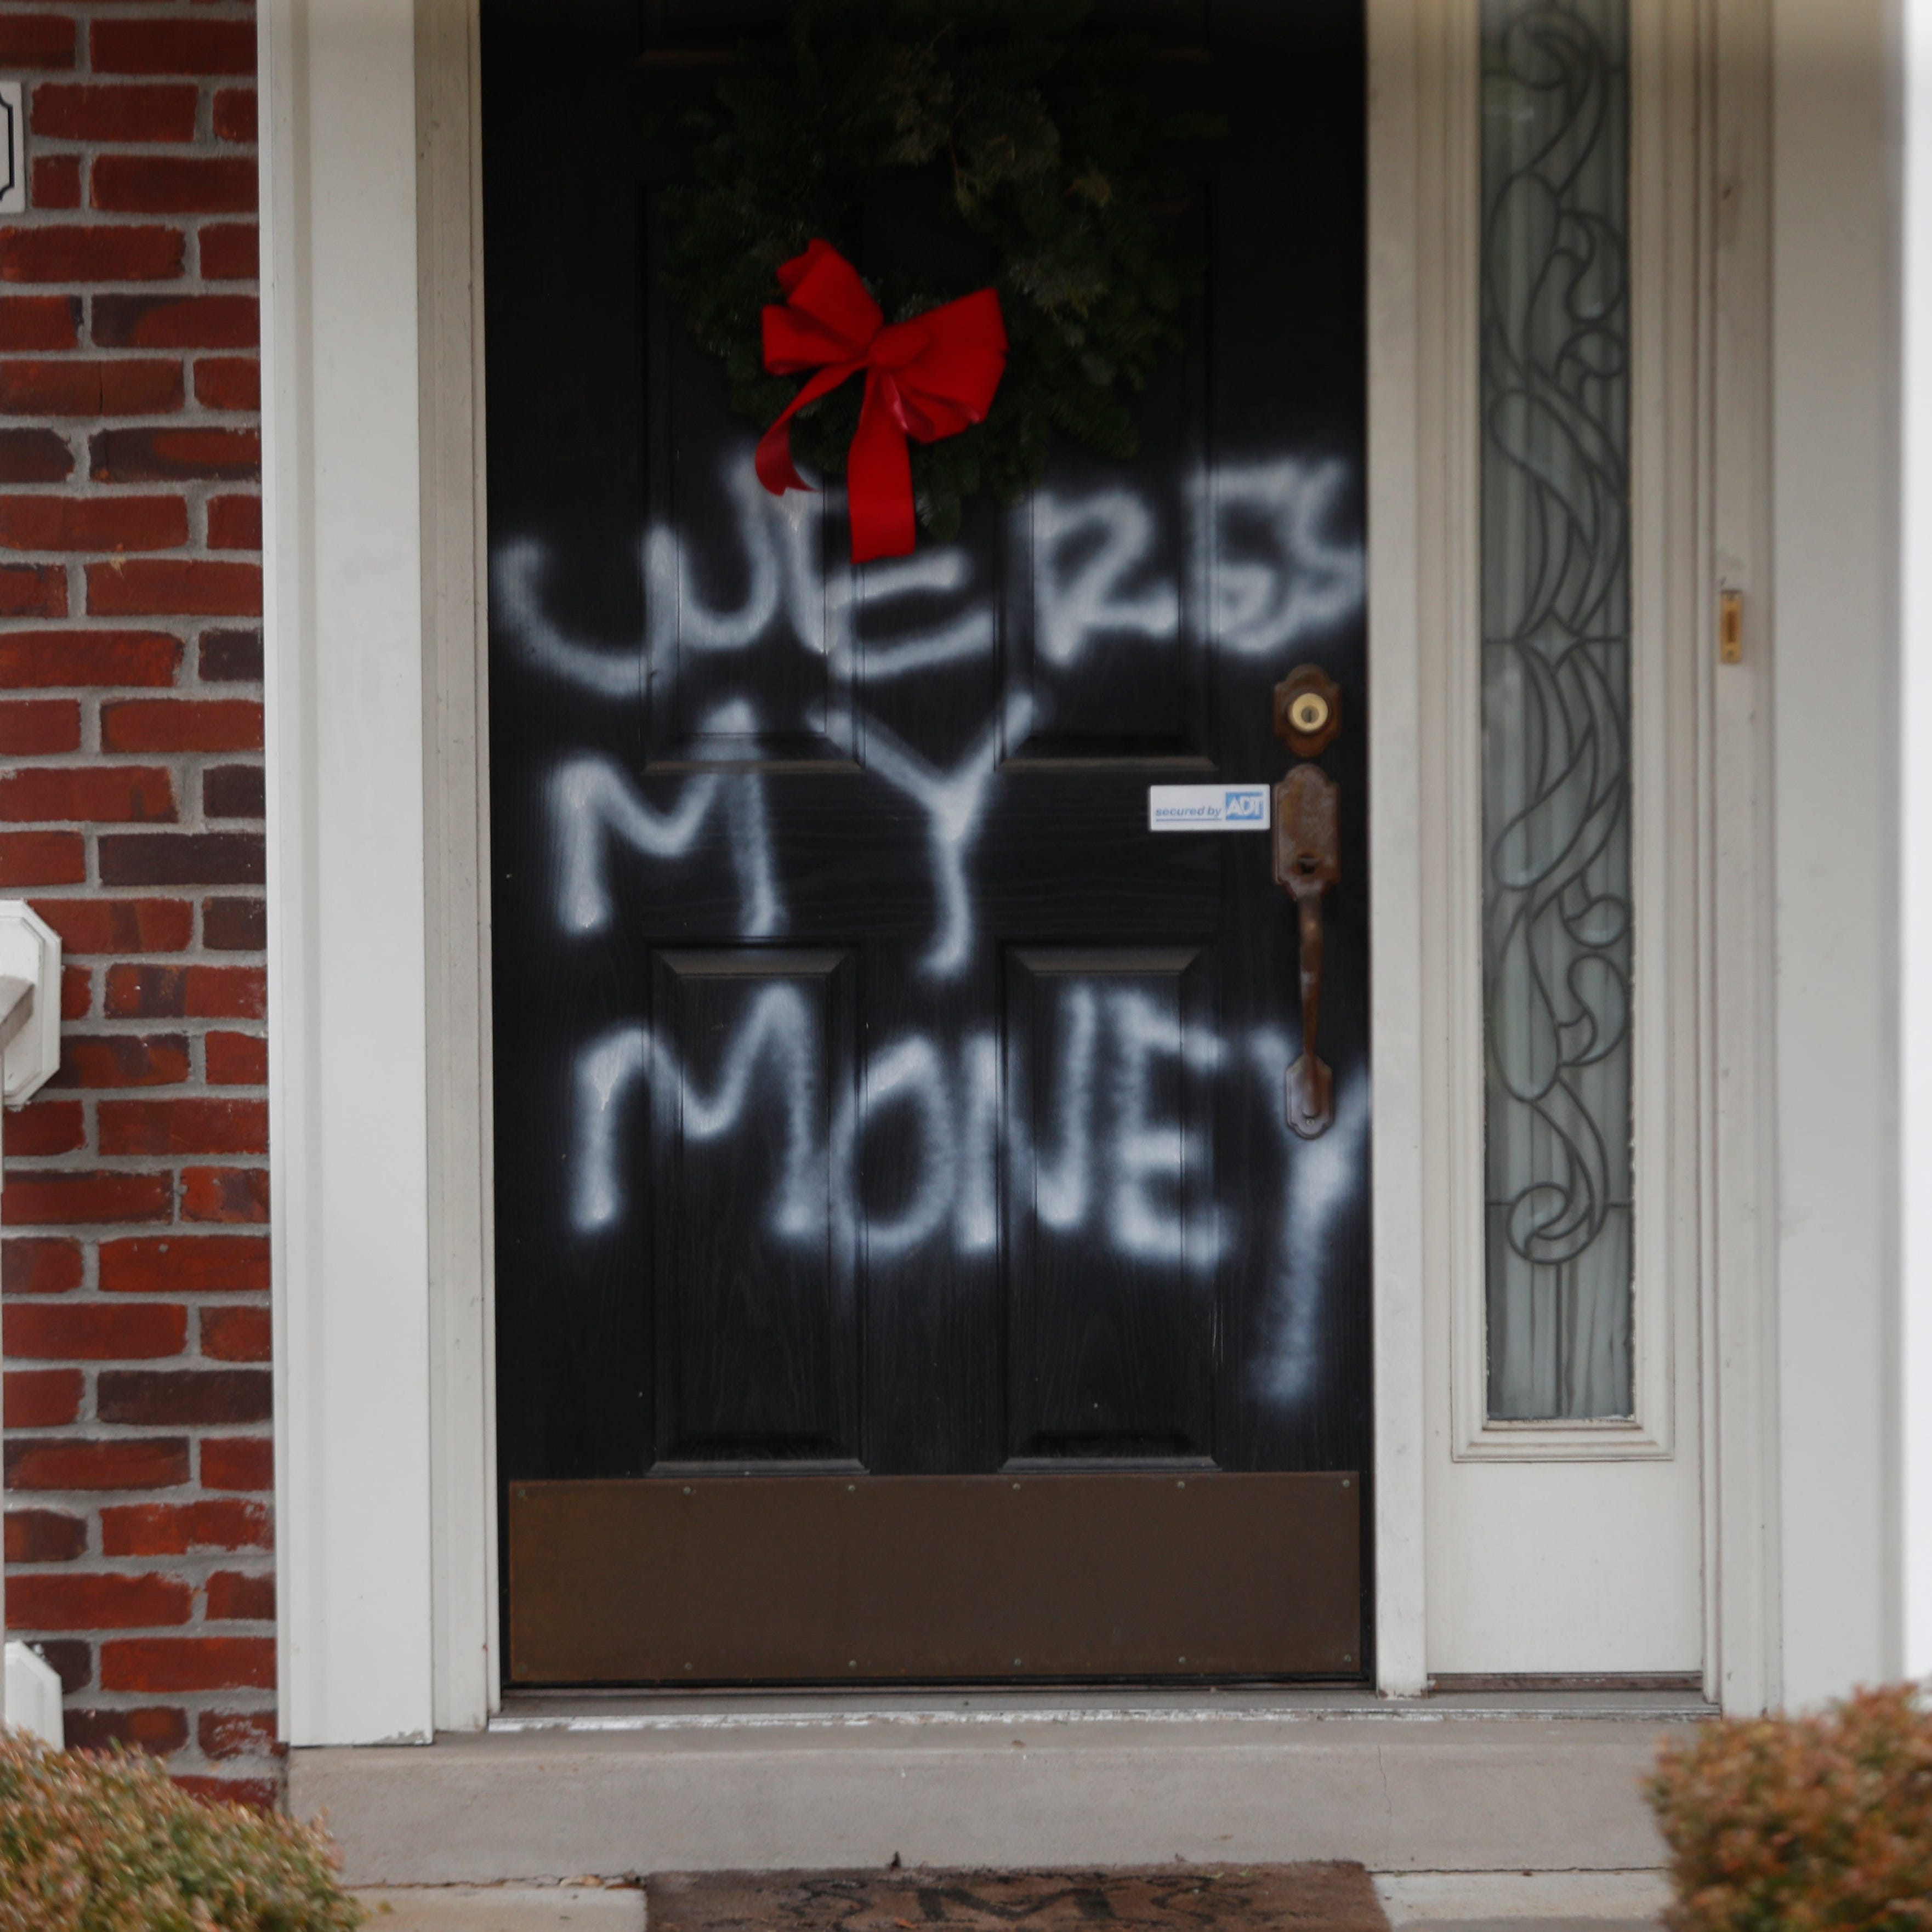 January 2, 2021:  United States Senate Majority Leader Mitch McConnell's home in Louisville was vandalized following his blocking of $2000 stimulus checks.